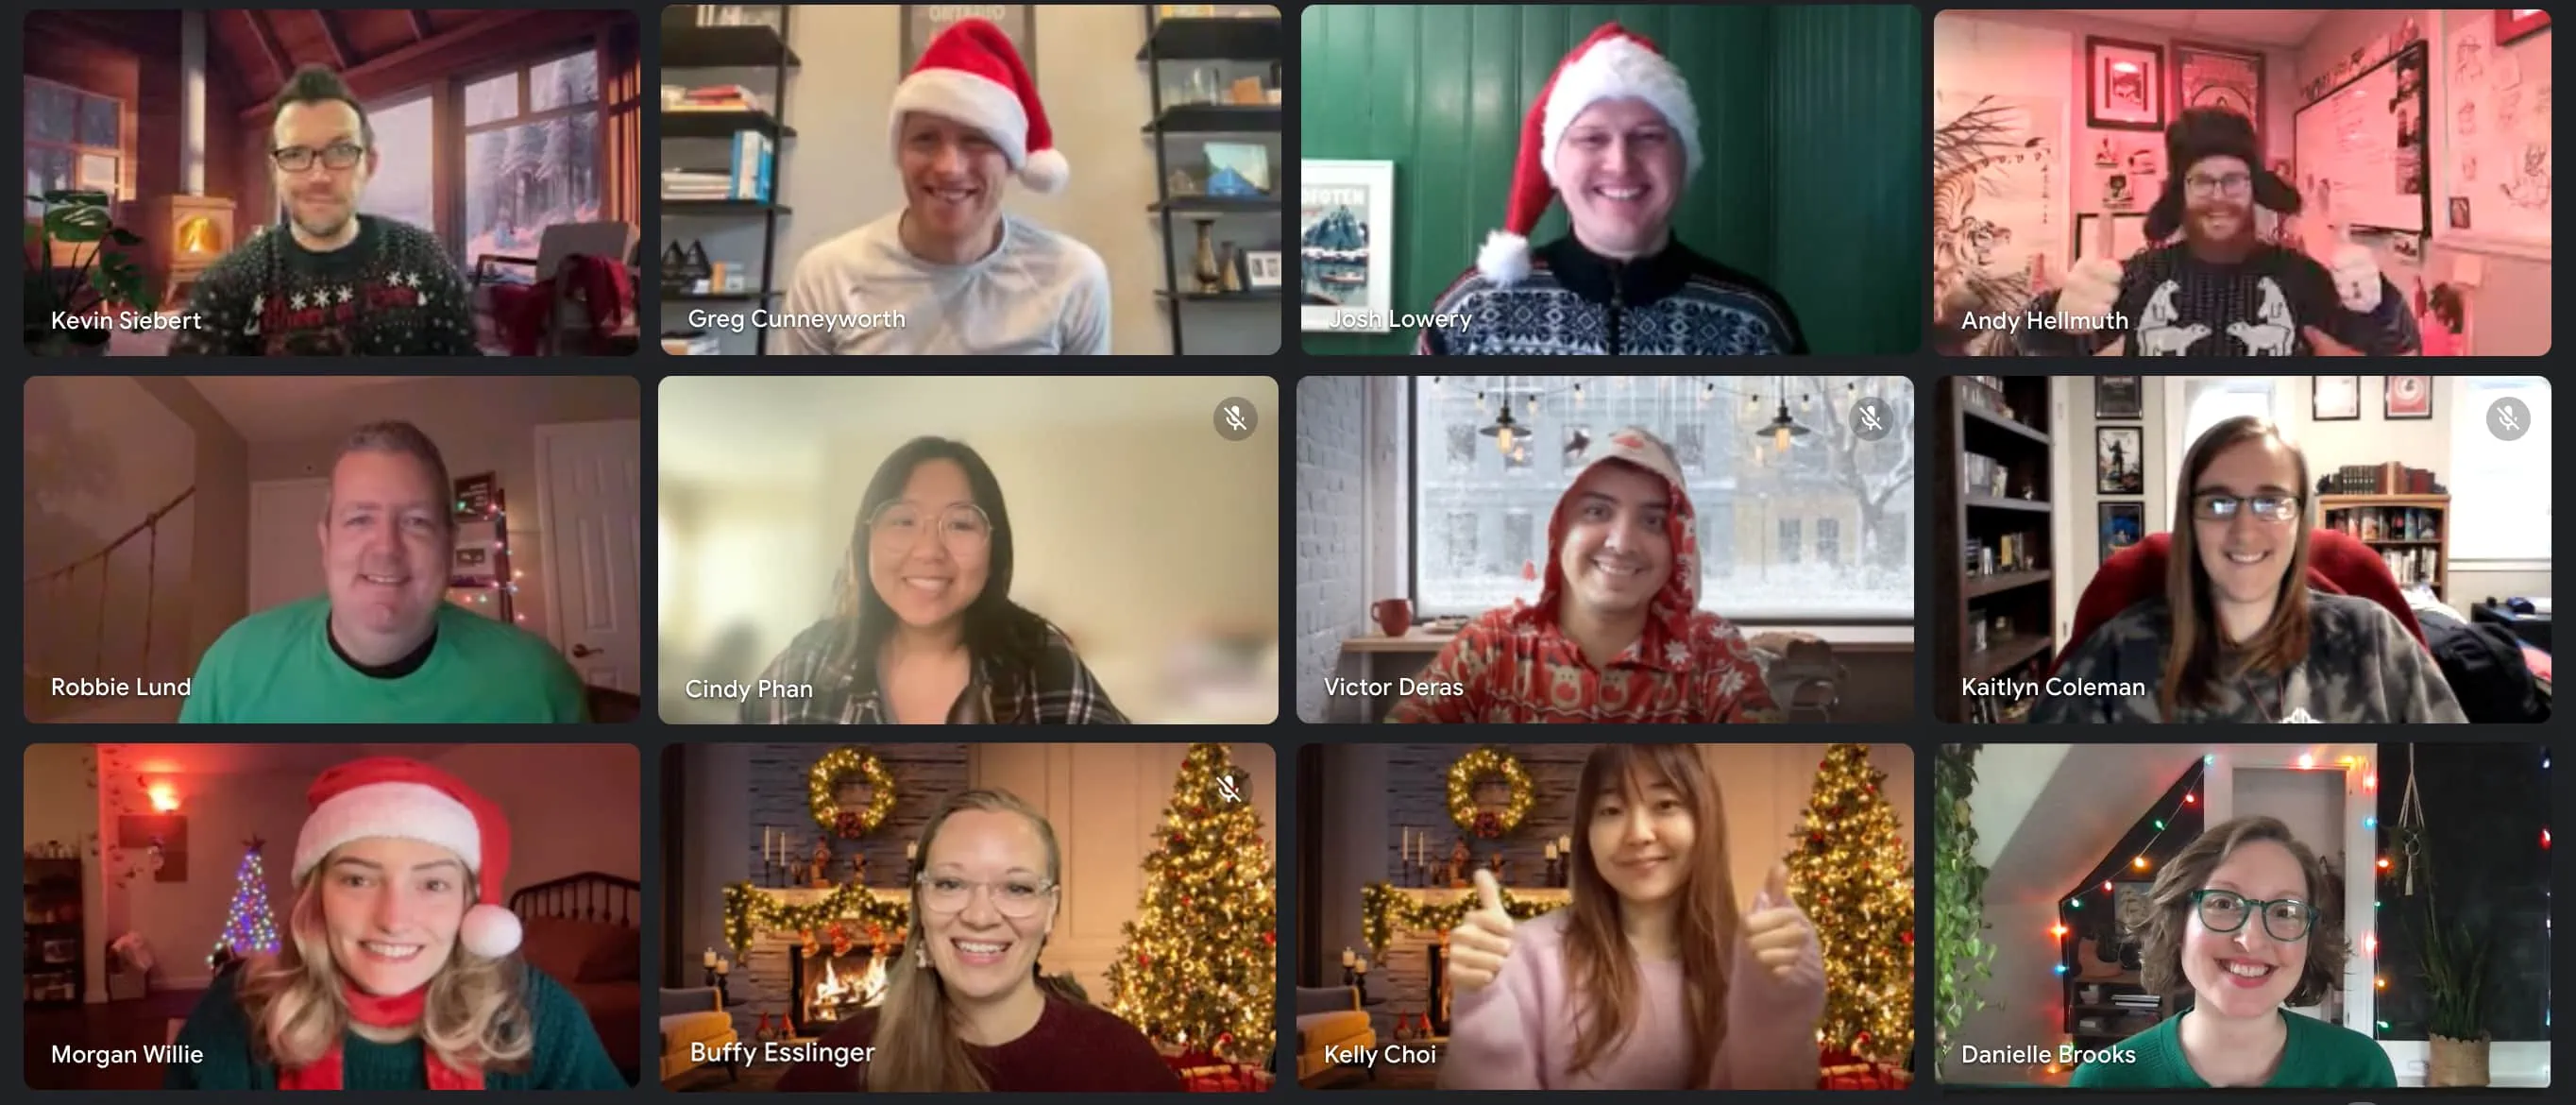 All Makers smiling in their festive looking zoom squares for the holiday team photo.